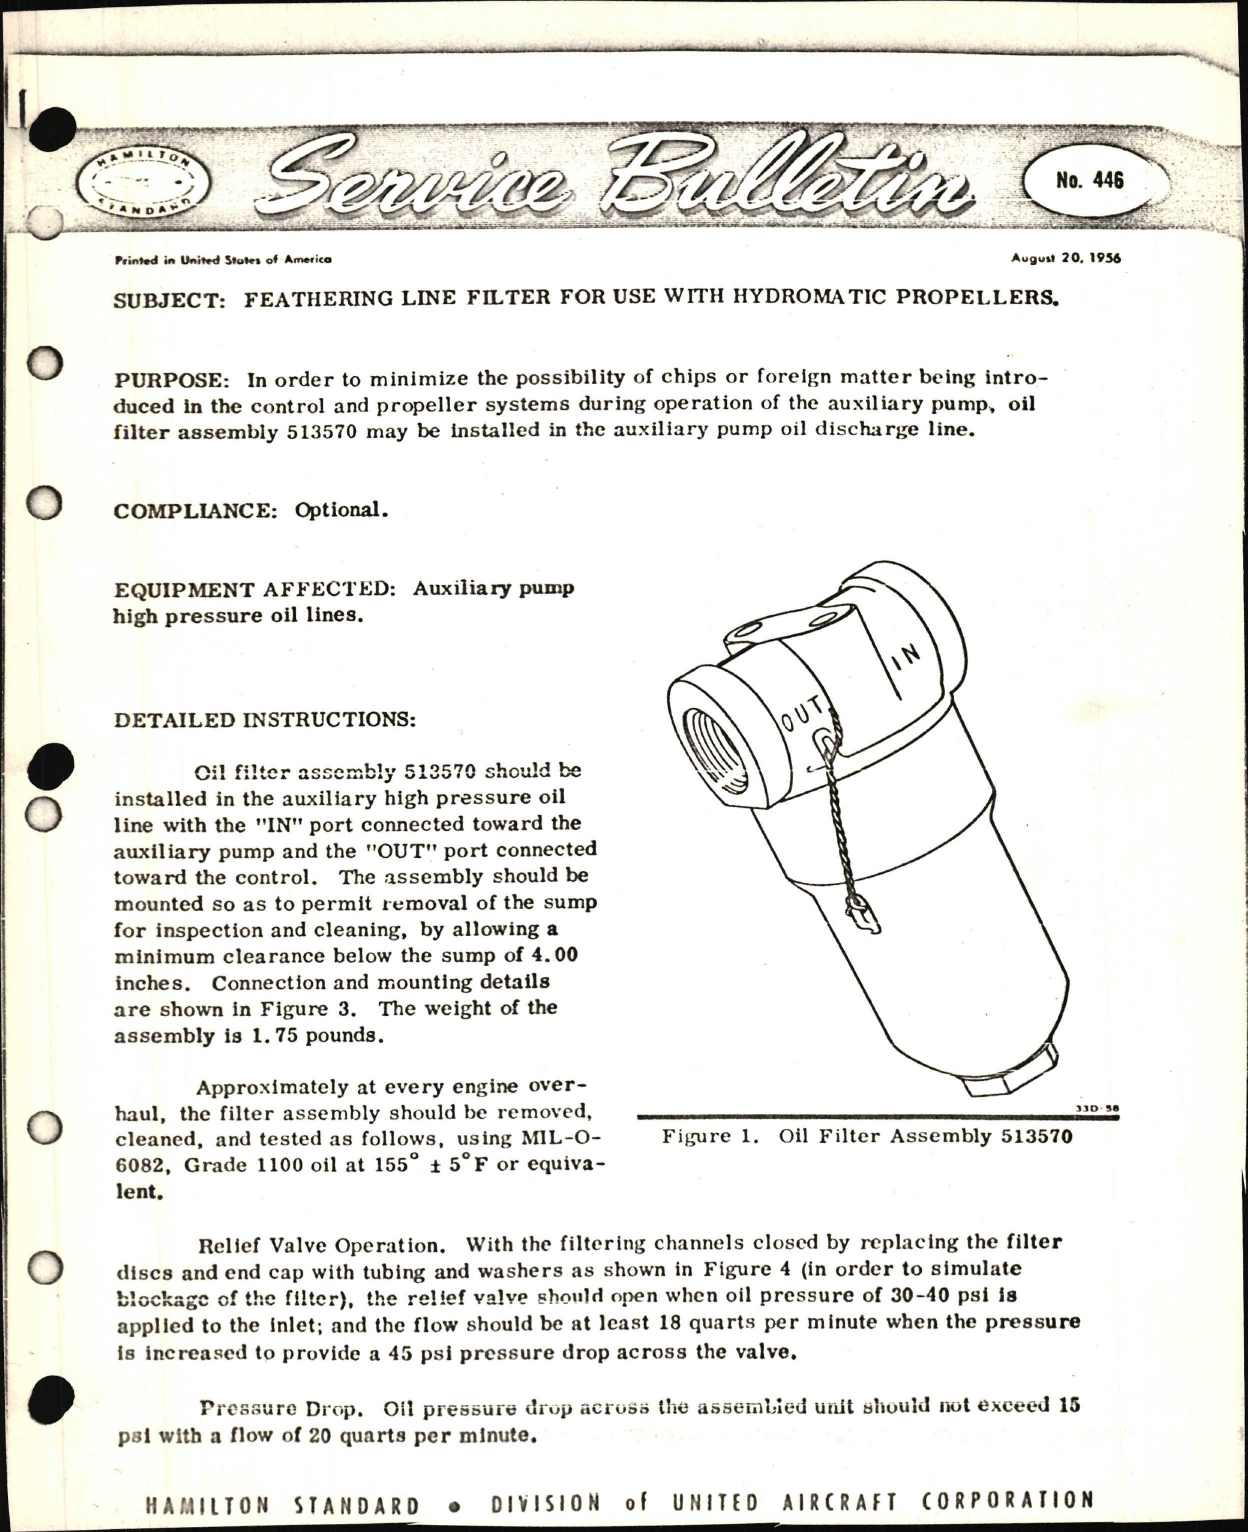 Sample page 1 from AirCorps Library document: Feathering Line Filter for Use with Hydromatic Propellers